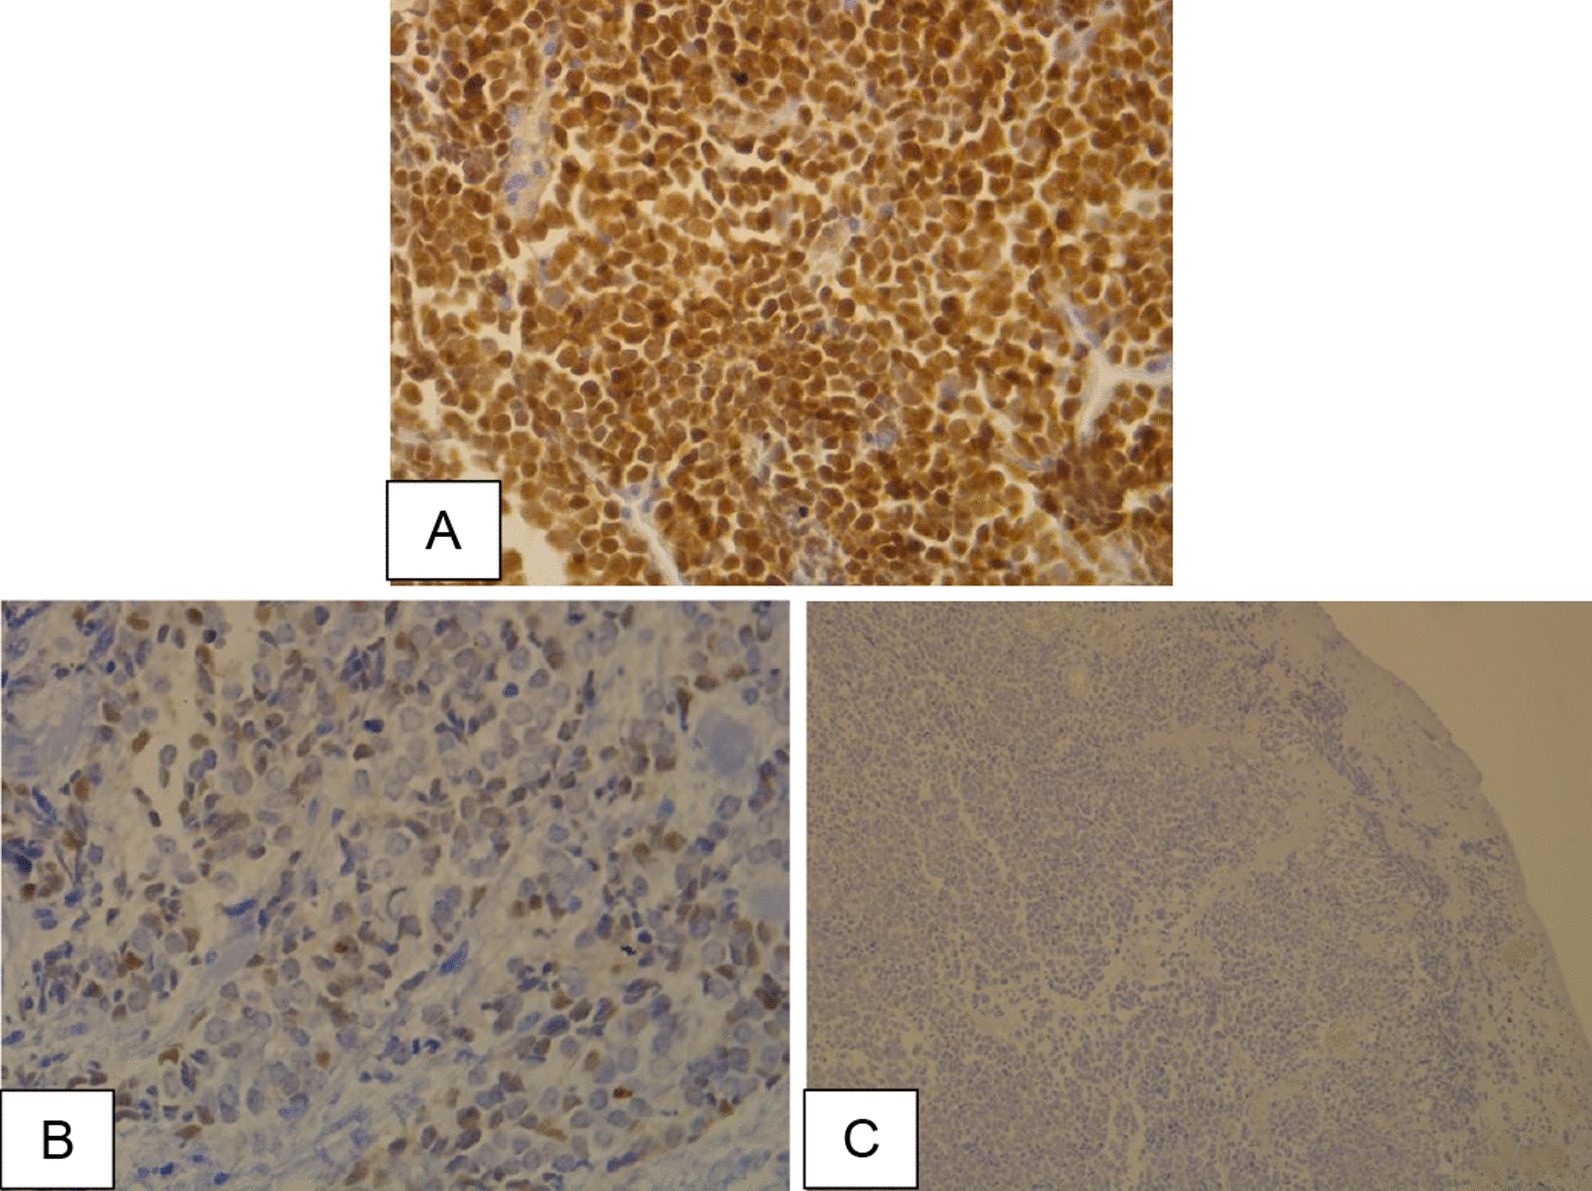 The prognostic role of PD-L1 expression and the presence of polyomavirus in Merkel cell carcinoma cases